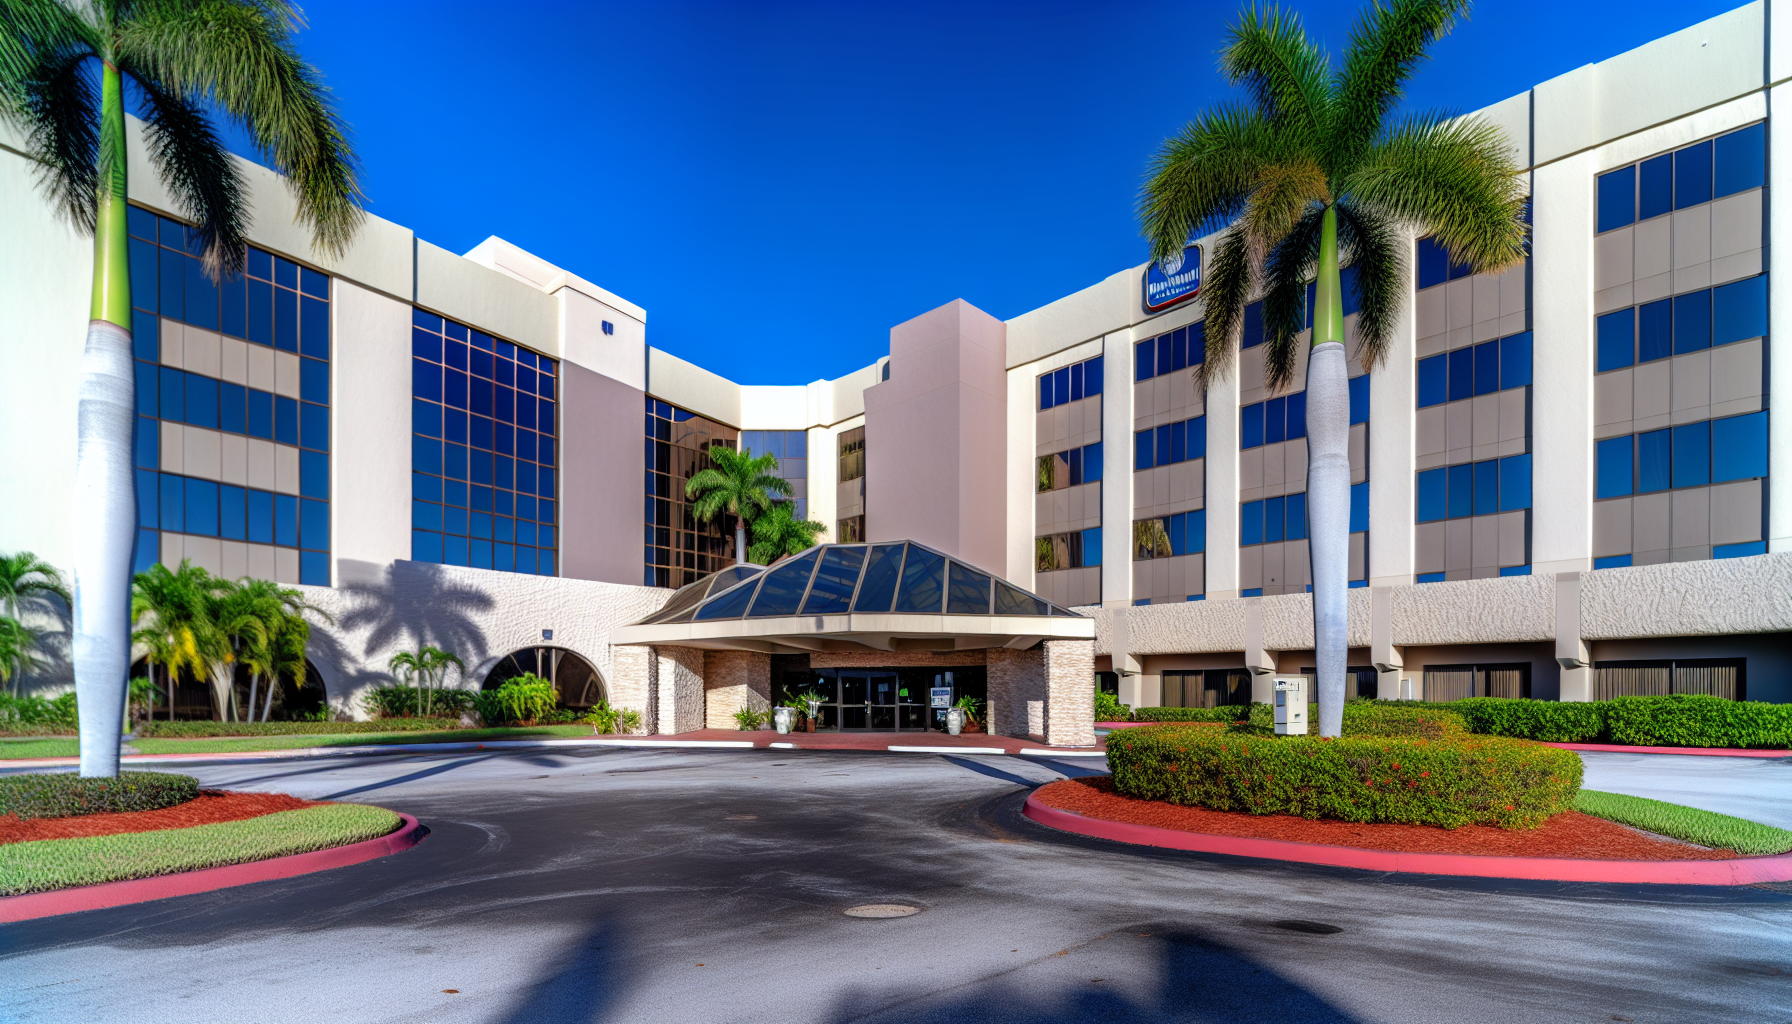 Best Western hotel exterior near Fort Lauderdale Airport Cruise Port